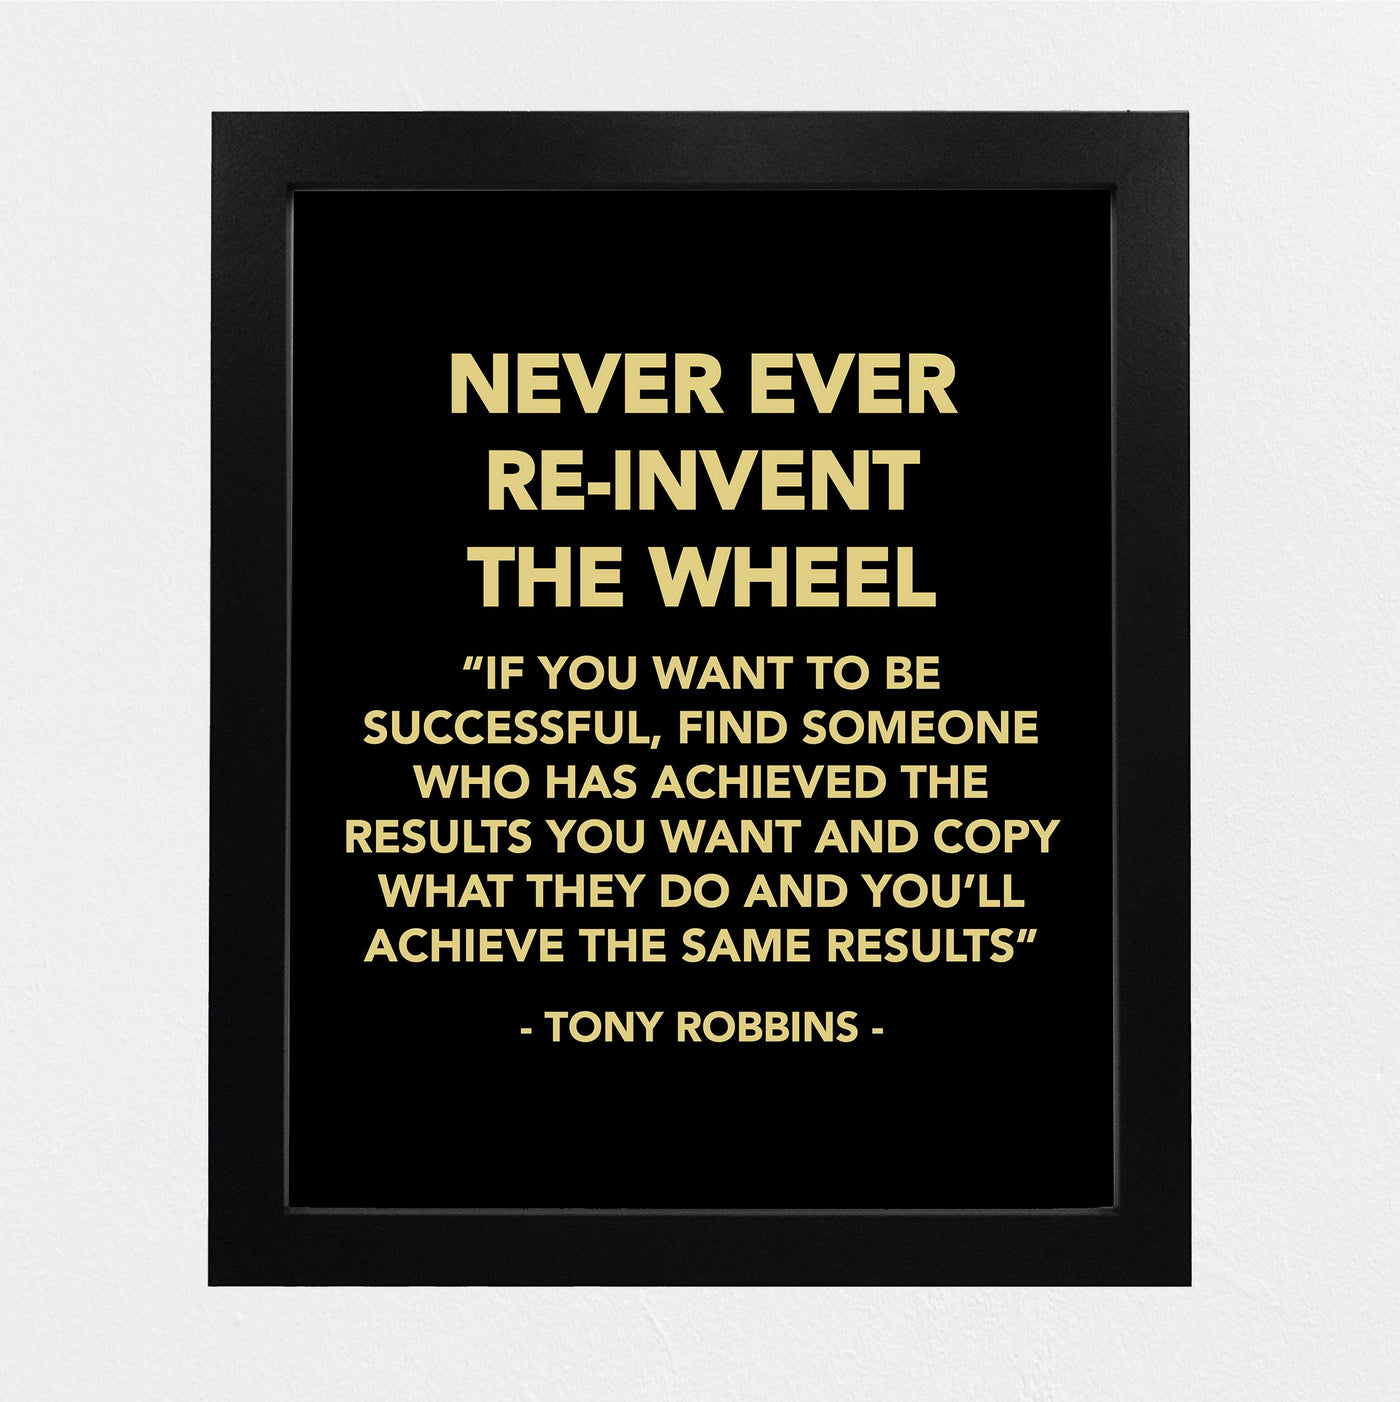 Tony Robbins-"Never Ever Reinvent the Wheel" Motivational Quotes Wall Decor -8 x 10" Inspirational Typographic Art Print -Ready to Frame. Home-Office-School-Work Decor. Great Reminder for Success!